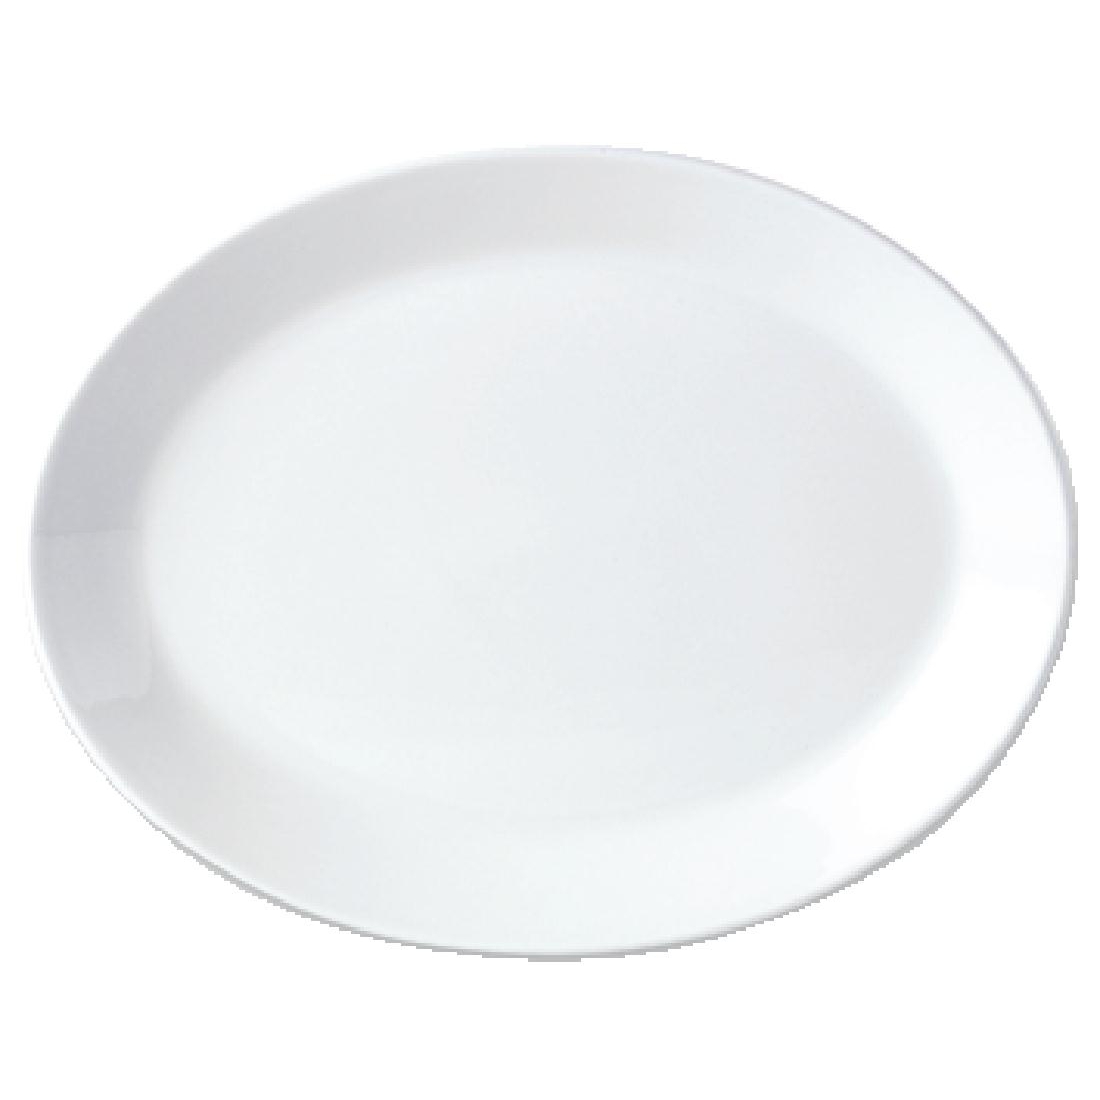 Steelite Simplicity White Oval Coupe Dishes 342mm